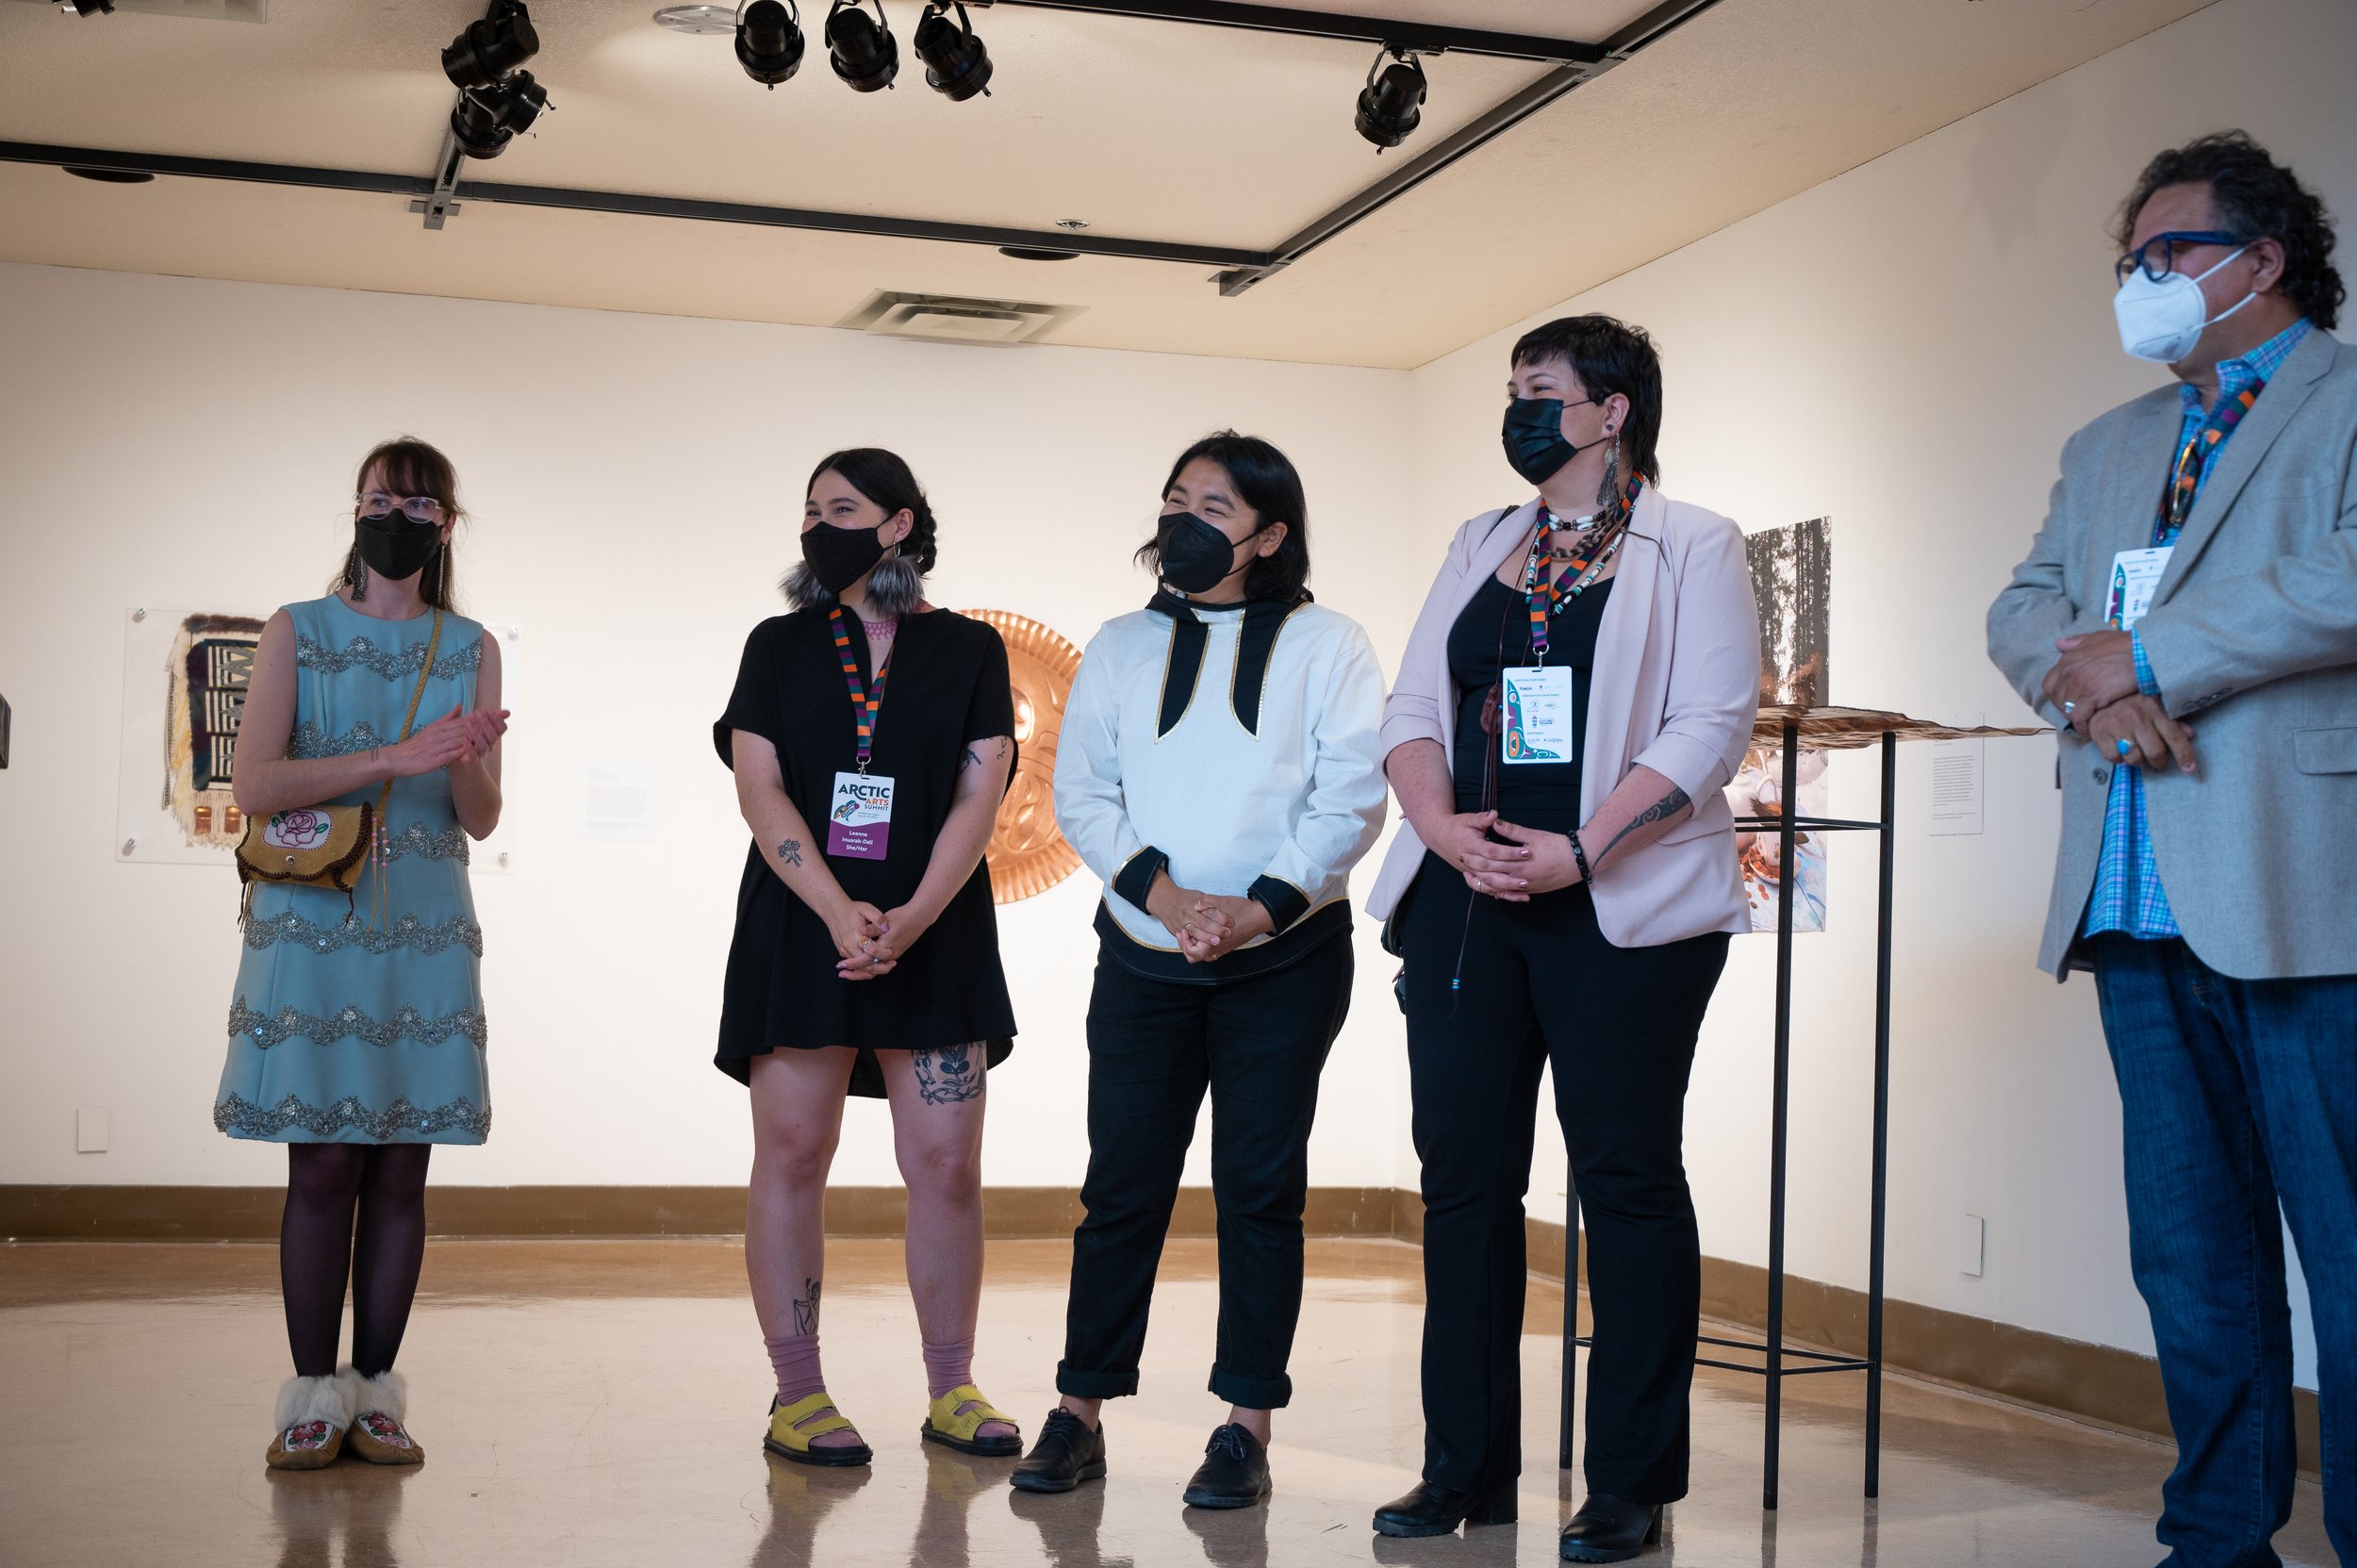   TETHER  co-curators Teresa Vander Meer-Chassé, Leanne Inuarak-Dall, Darcie “Ouiyaghasiak” Bernhardt, and Heather Von Steinhagen, at the opening reception during the Artcitc Arts Summit, Yukon Arts Centre, Whitehorse, YK, July 2022. Photo by Mike Th